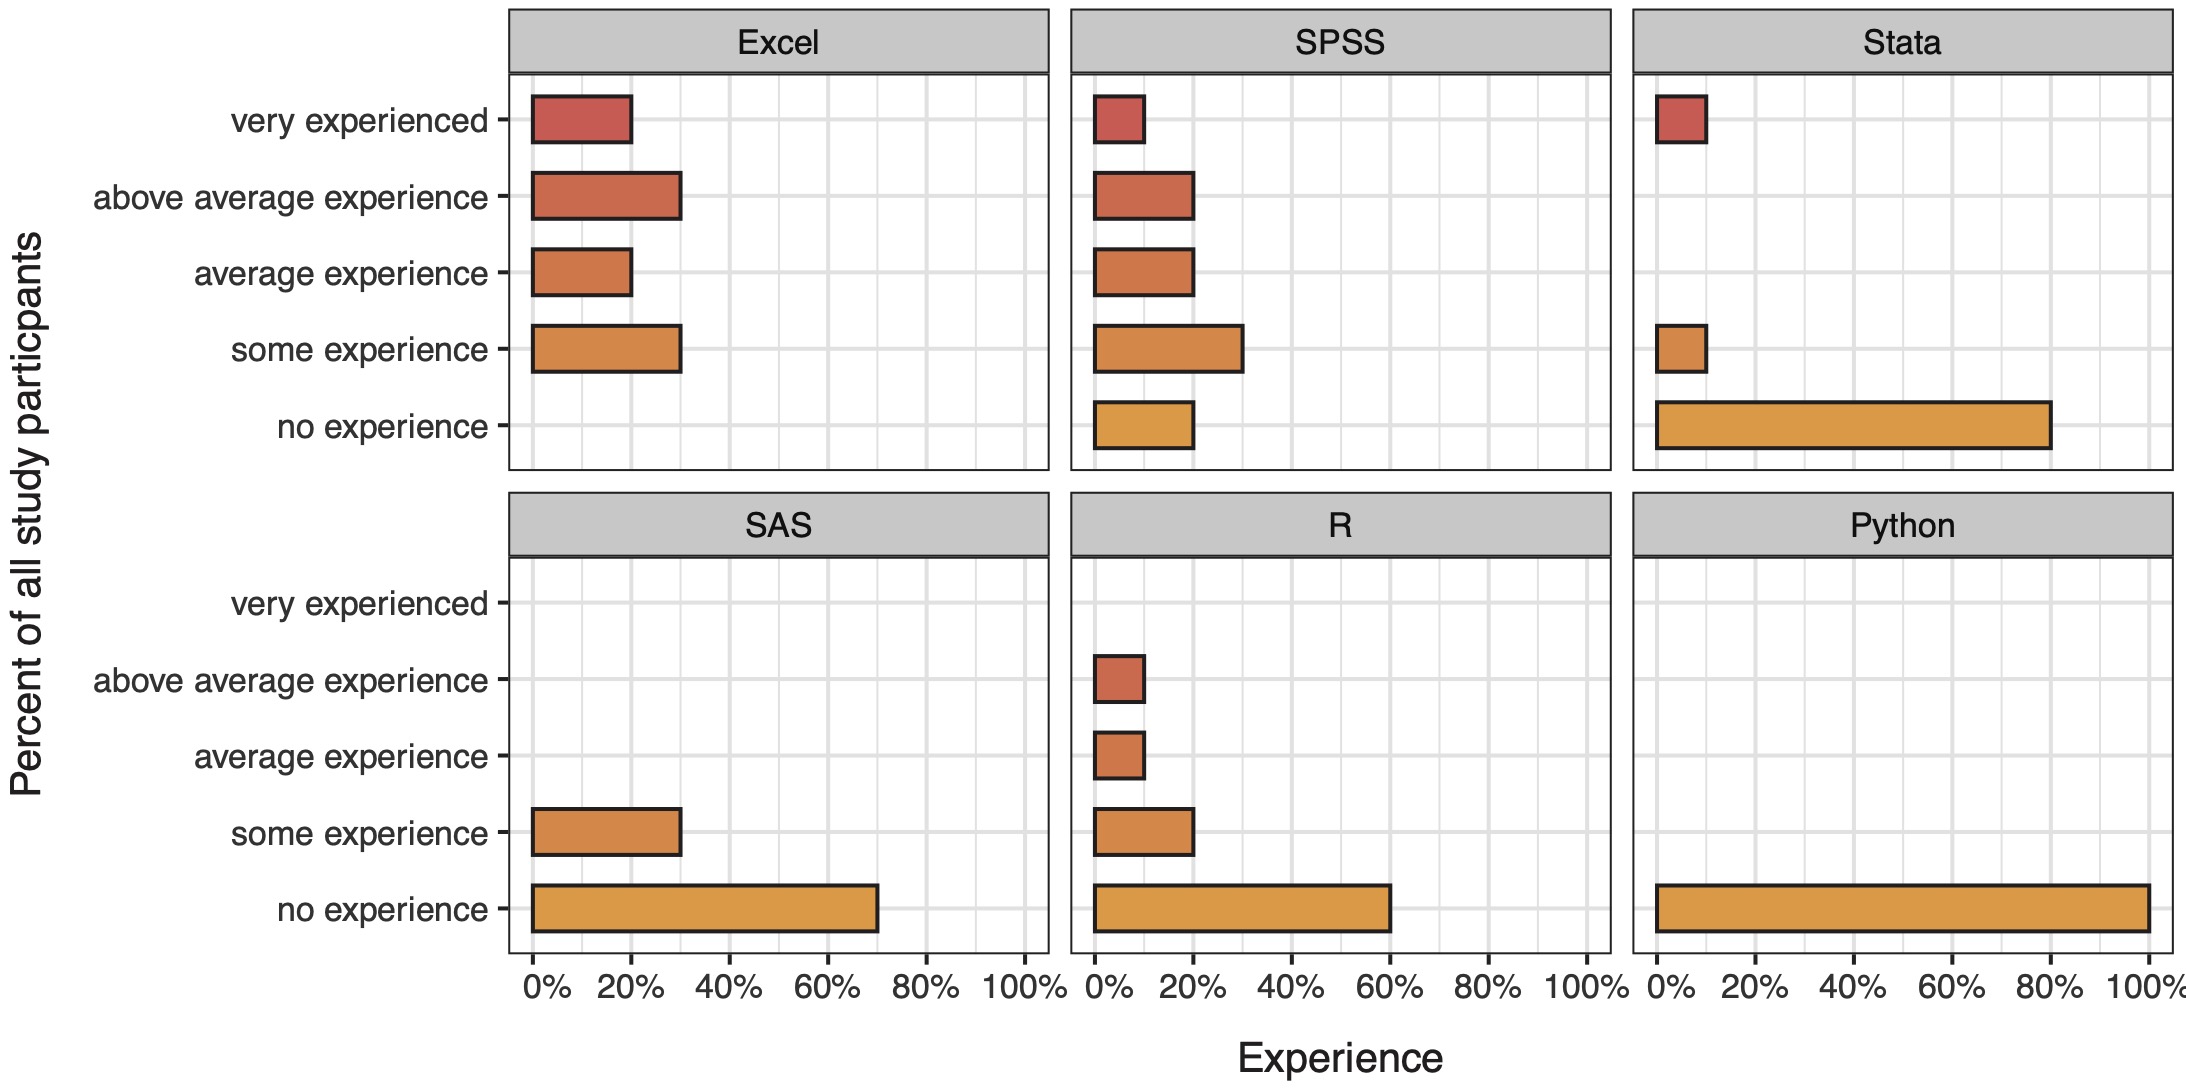 Data analysis software experience reported by study participants.